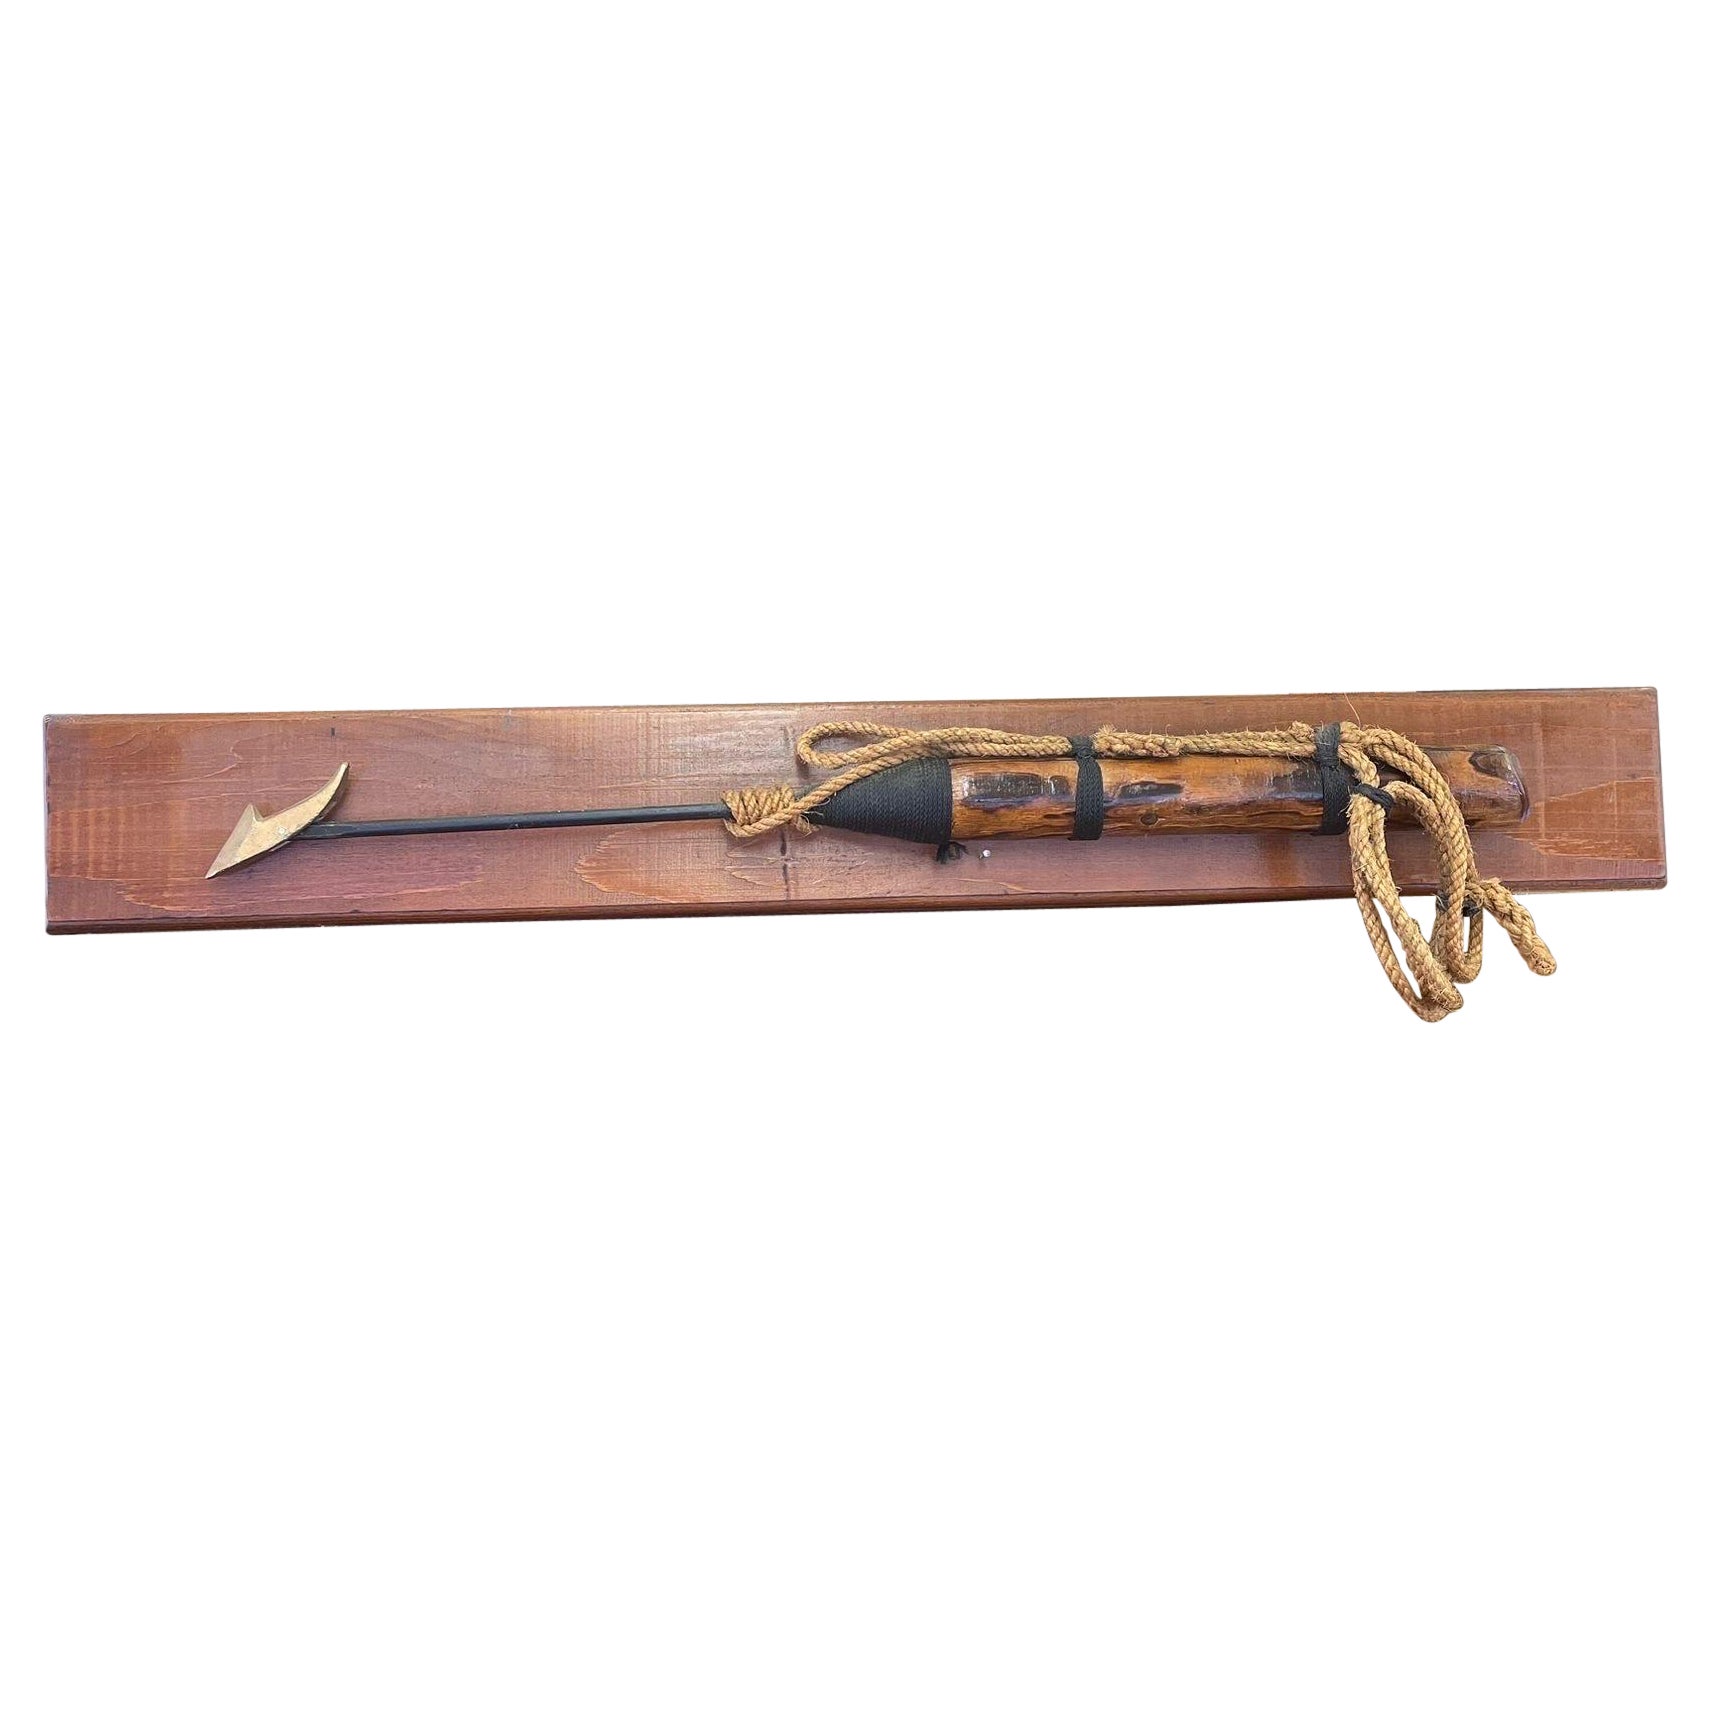 Vintage Whaling Harpoon Decorative Reproduction on Wood Backing. For Sale